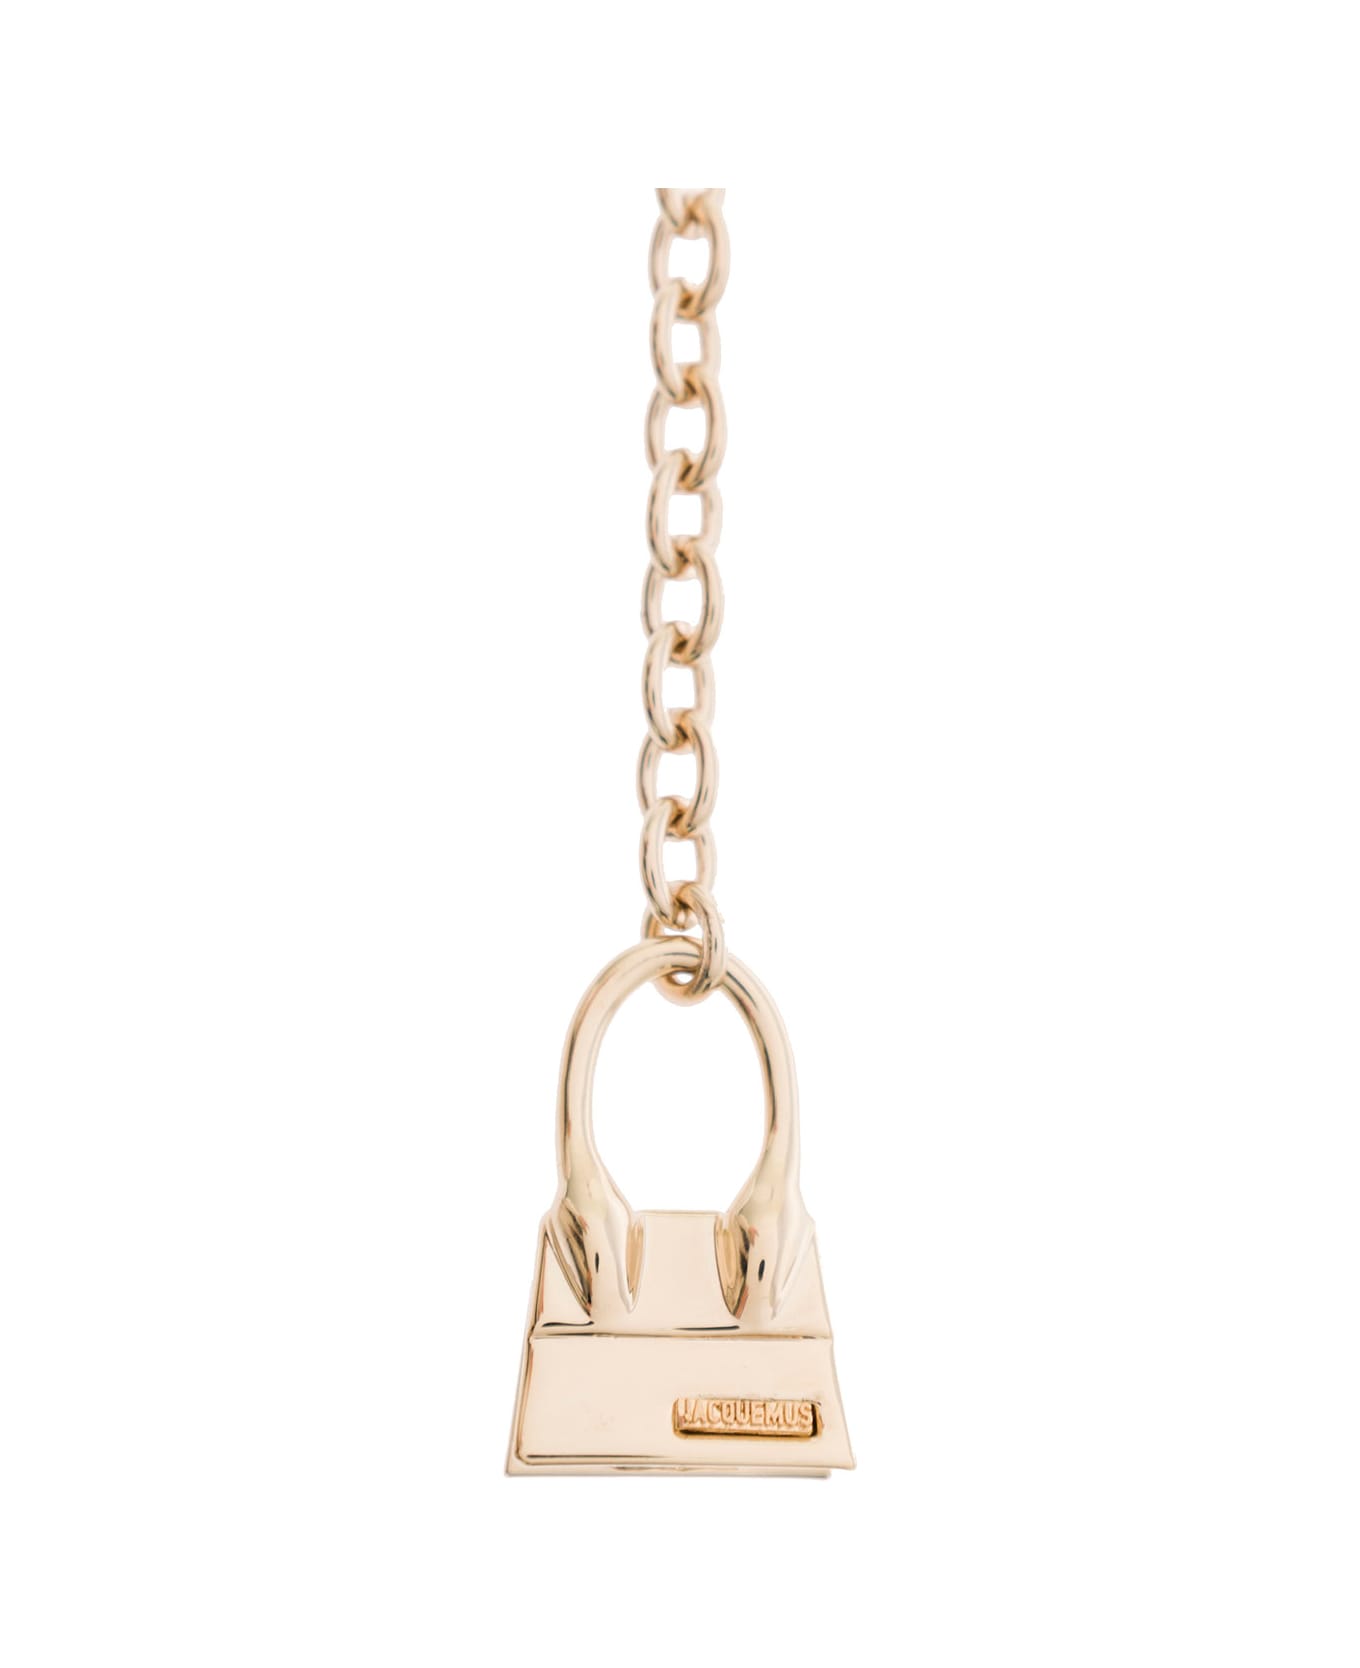 Jacquemus Chain Bracelet With Chiquito Charm - LIGHT GOLD